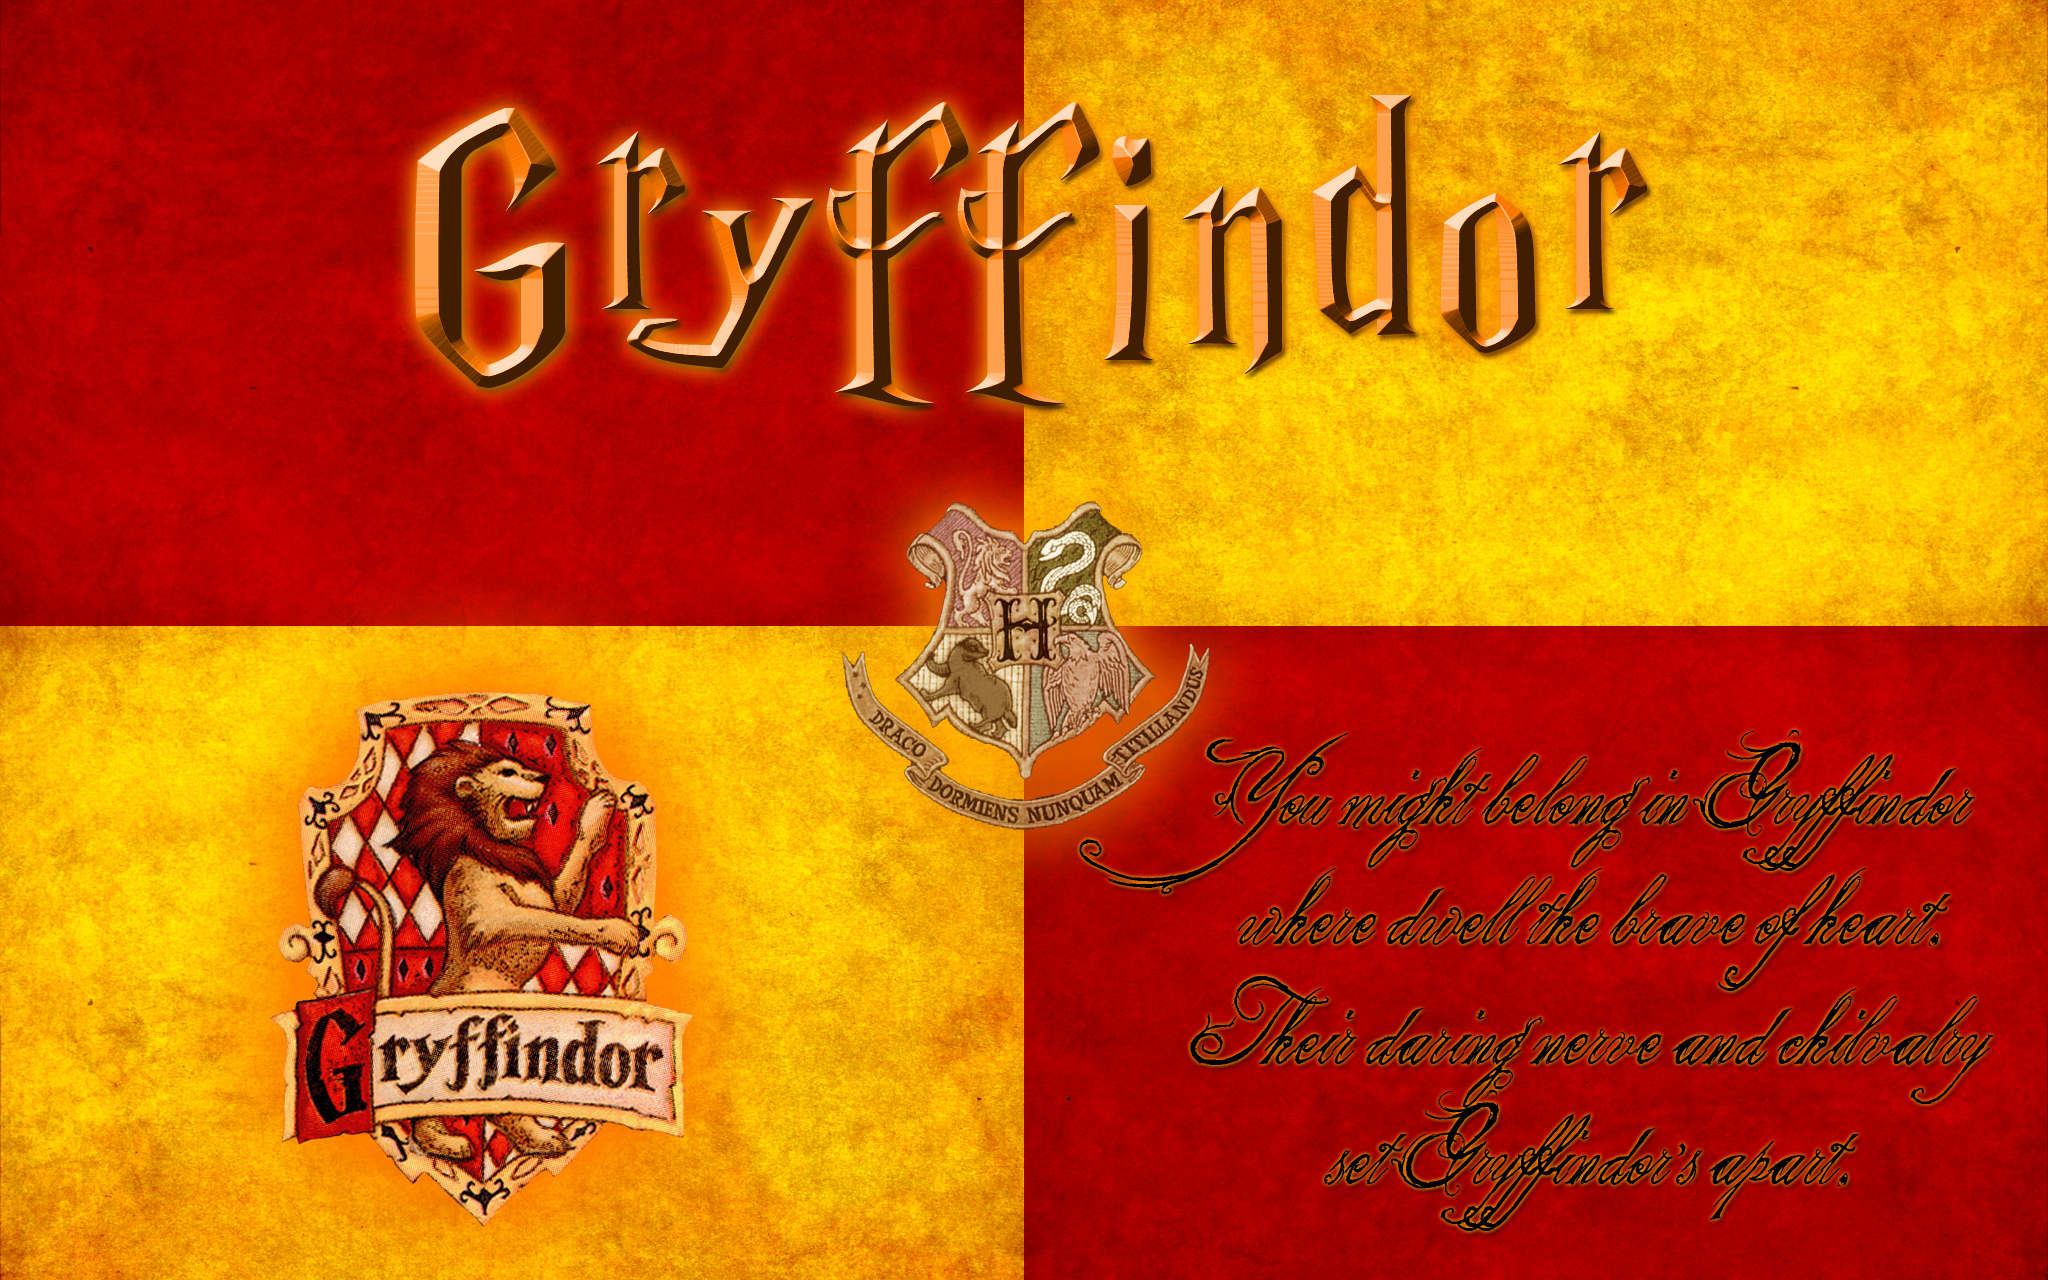 Harry Potter Image Gryffindor HD Wallpaper And Background Photos